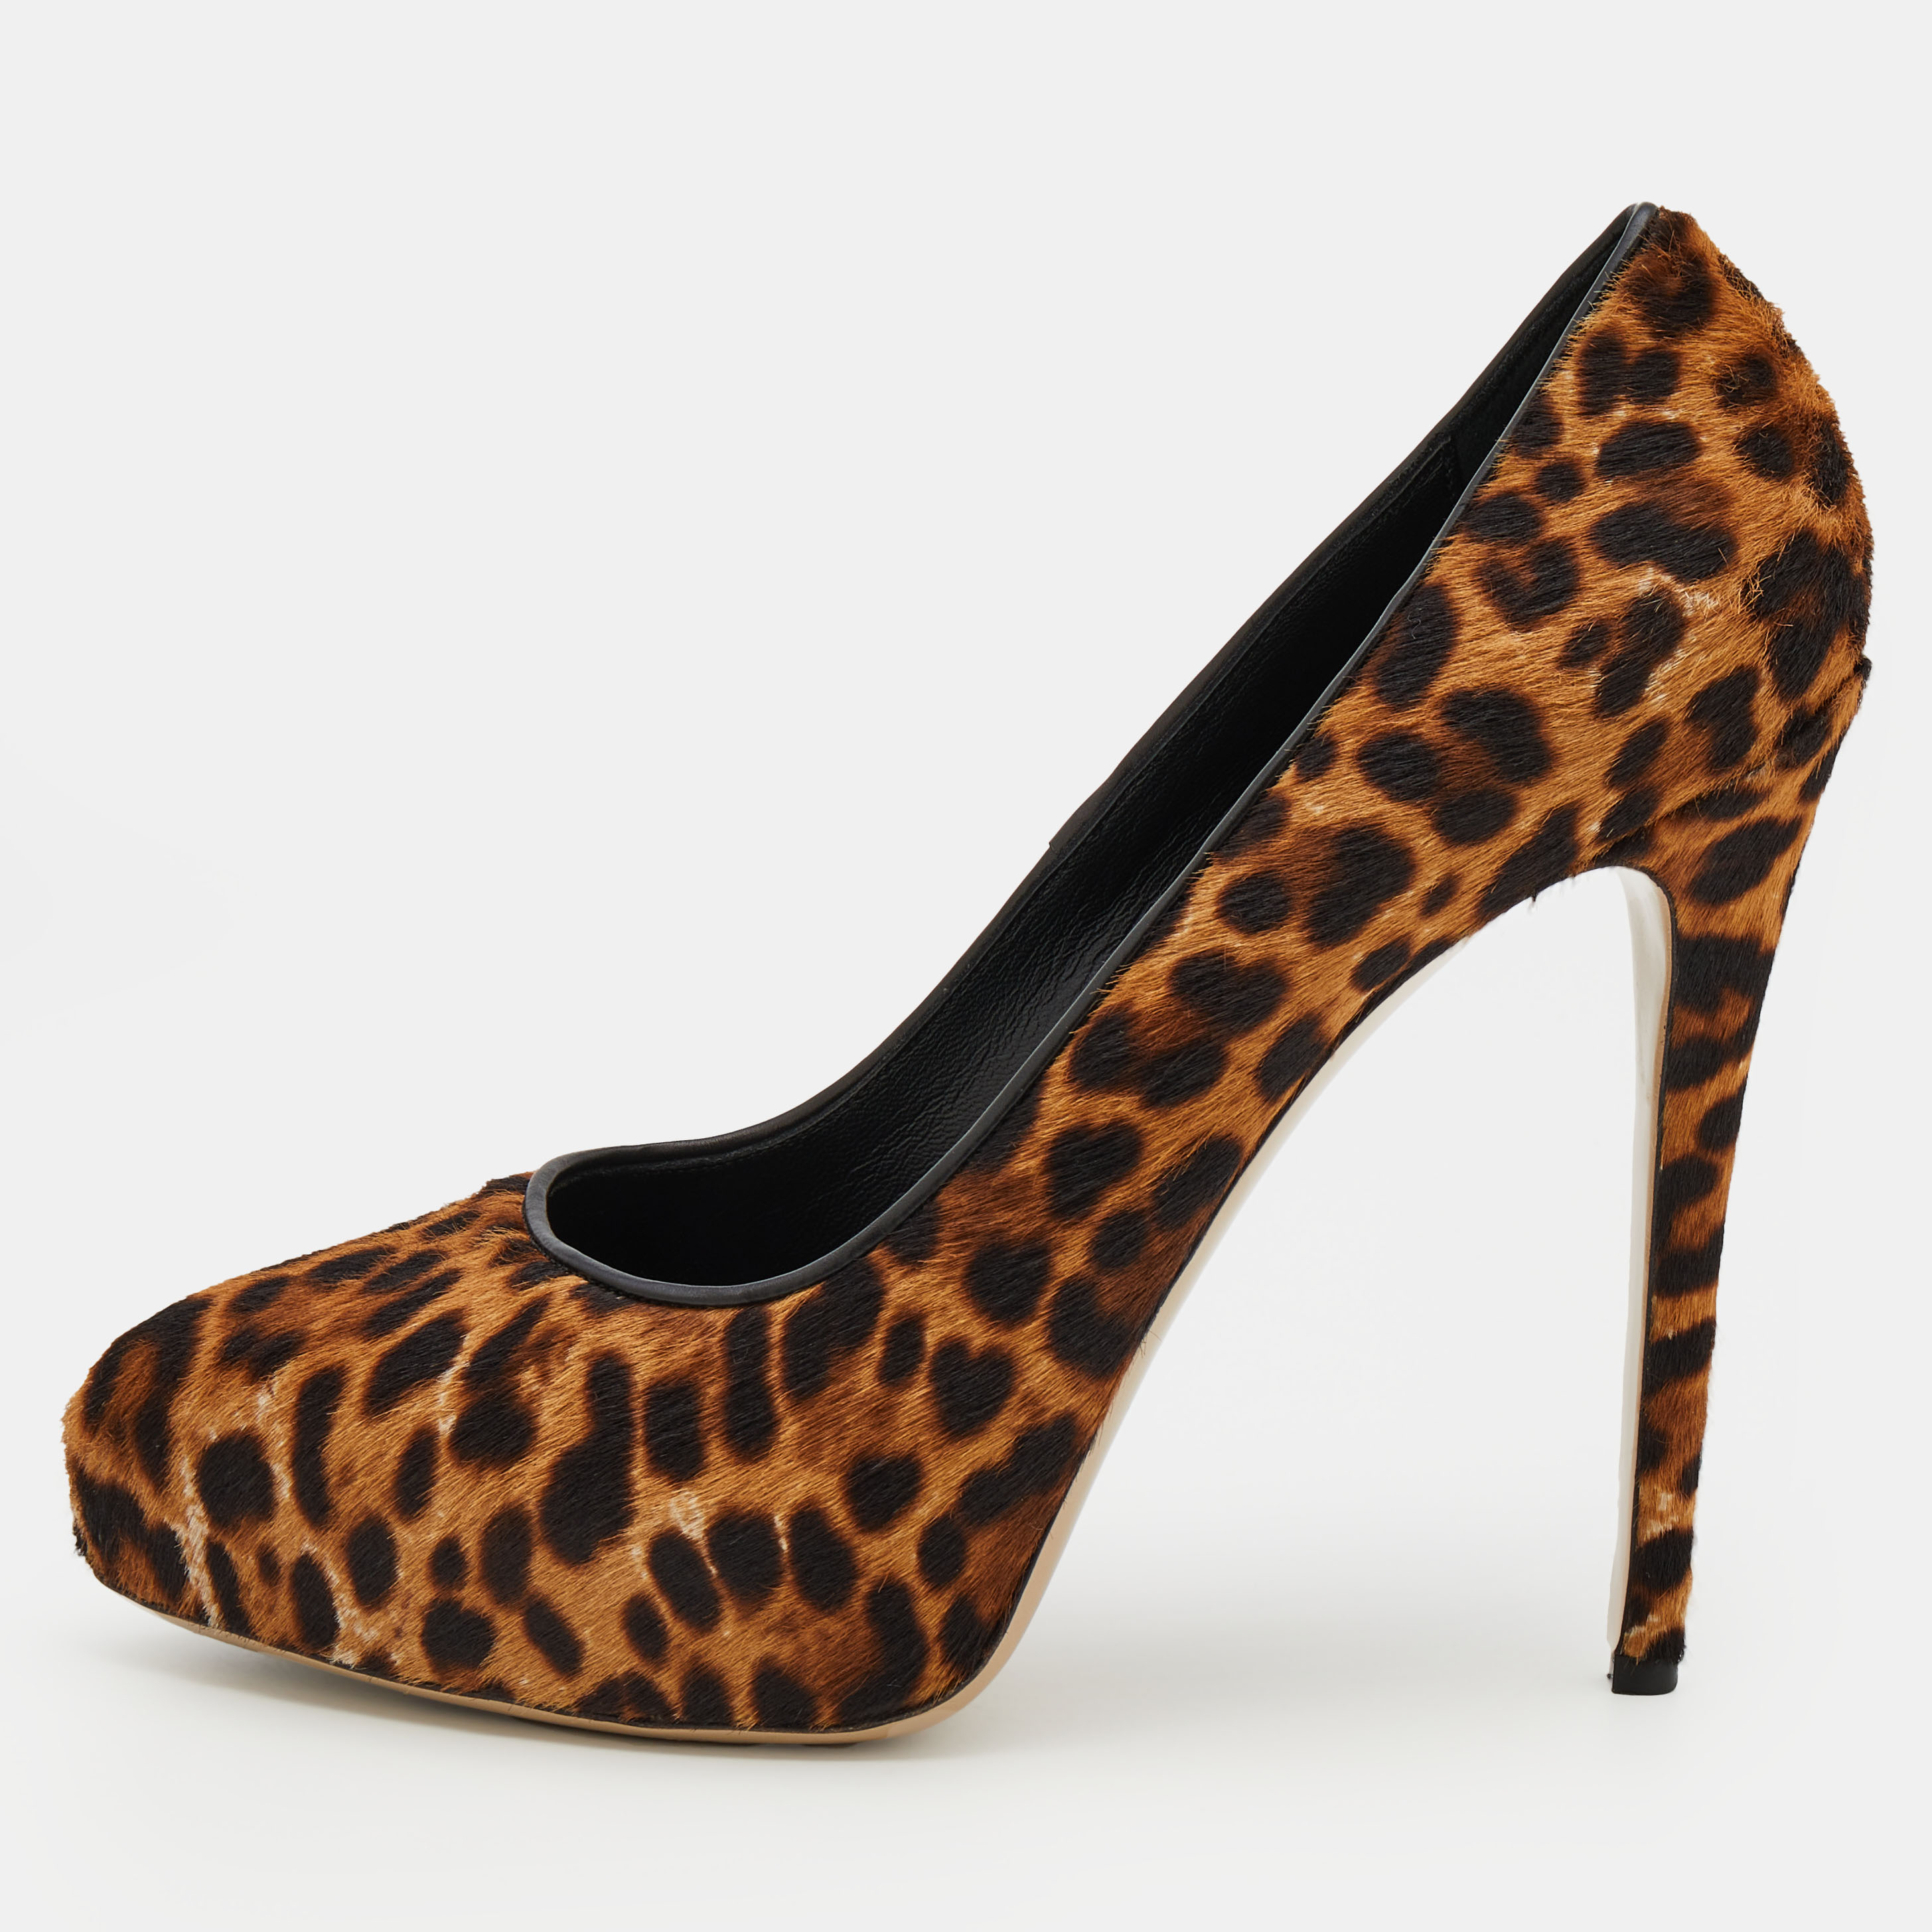 Known for creating stylish sophisticated and timeless designs Le Silla is a brand worth investing in. These platform pumps are made using leopard printed calf hair and come with closed toes and 13.5 cm heels. Team them with your LBD